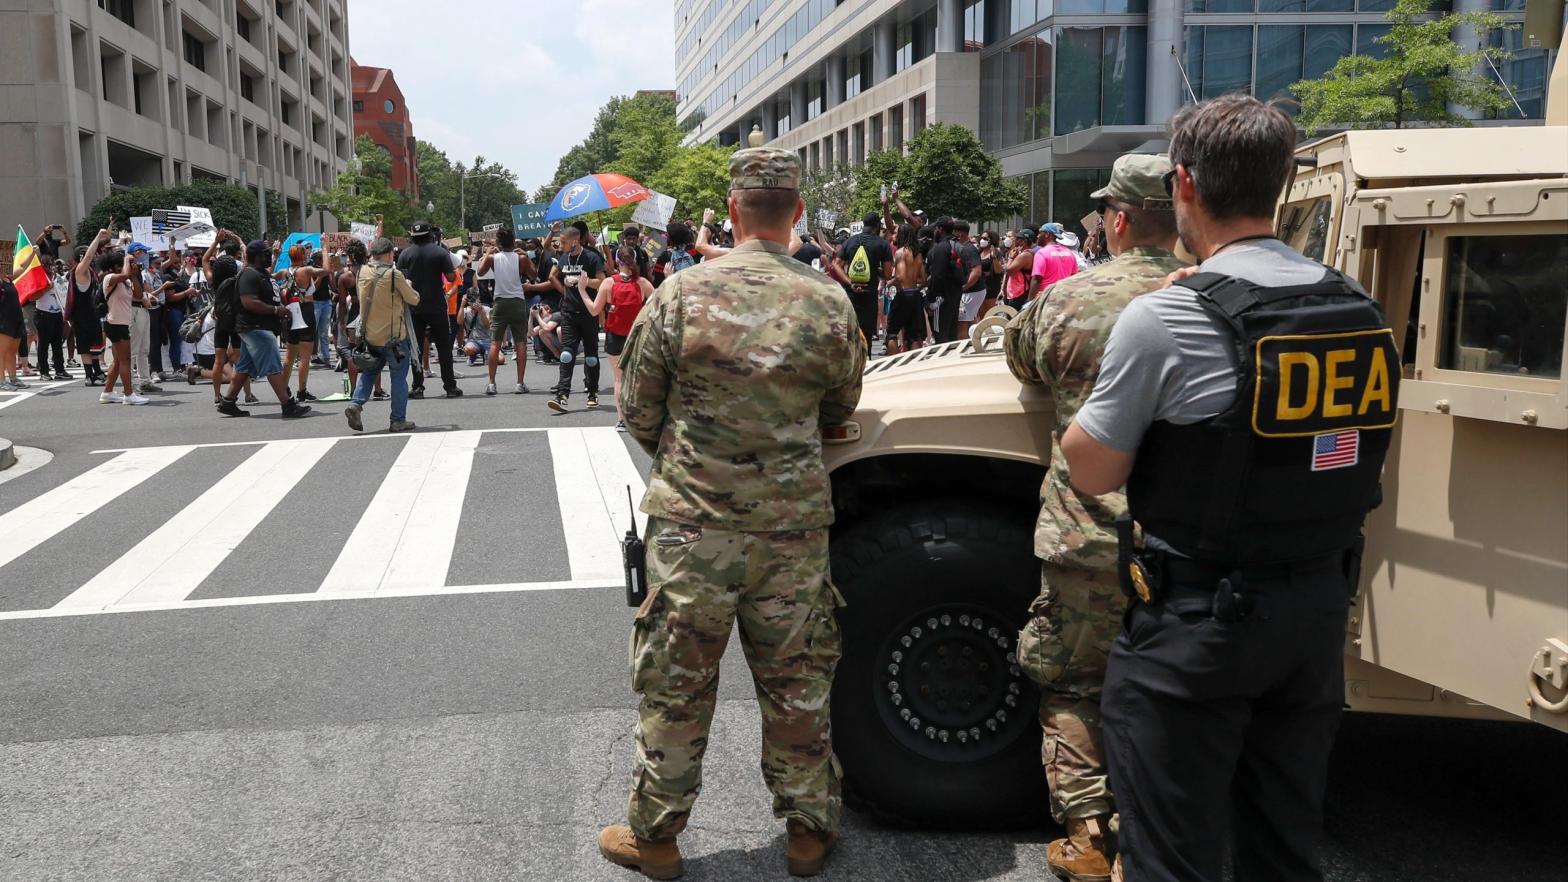 As a Drug Enforcement Agency police office and National Guard soldiers watch, demonstrators protest Saturday, June 6, 2020, in Washington, over the death of George Floyd. (Photo: Alex Brandon, AP)